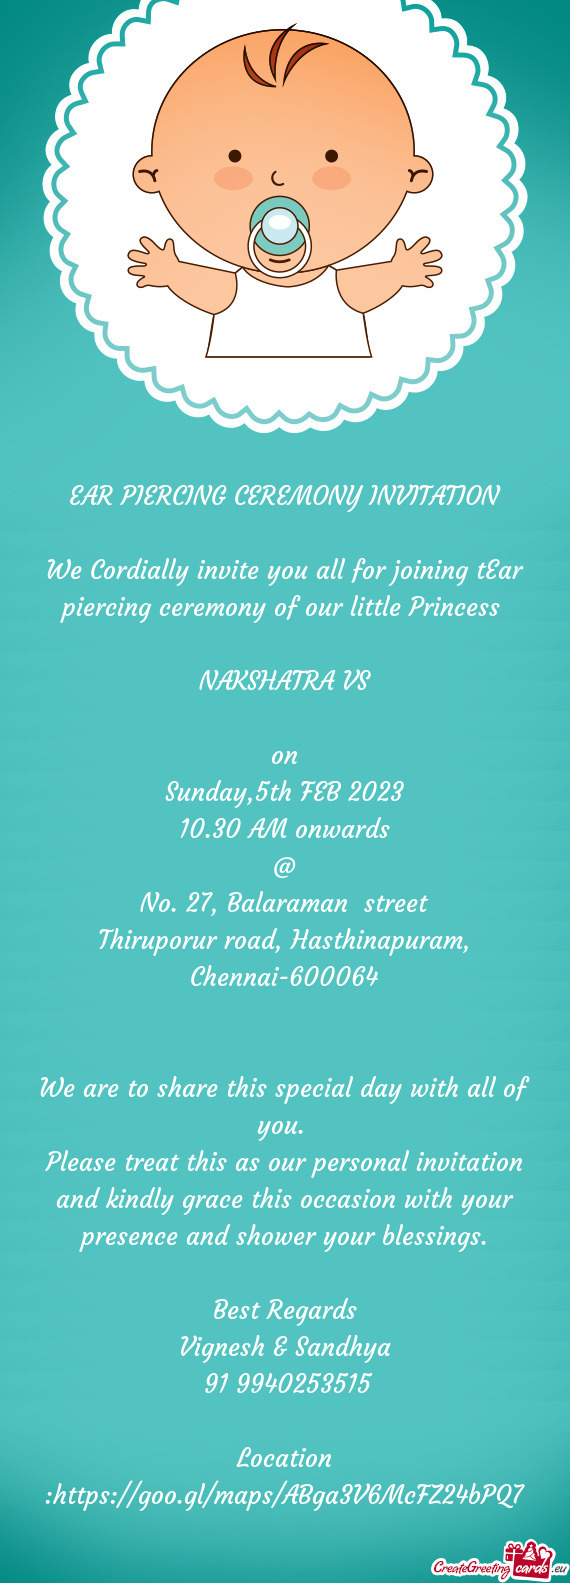 We Cordially invite you all for joining tEar piercing ceremony of our little Princess